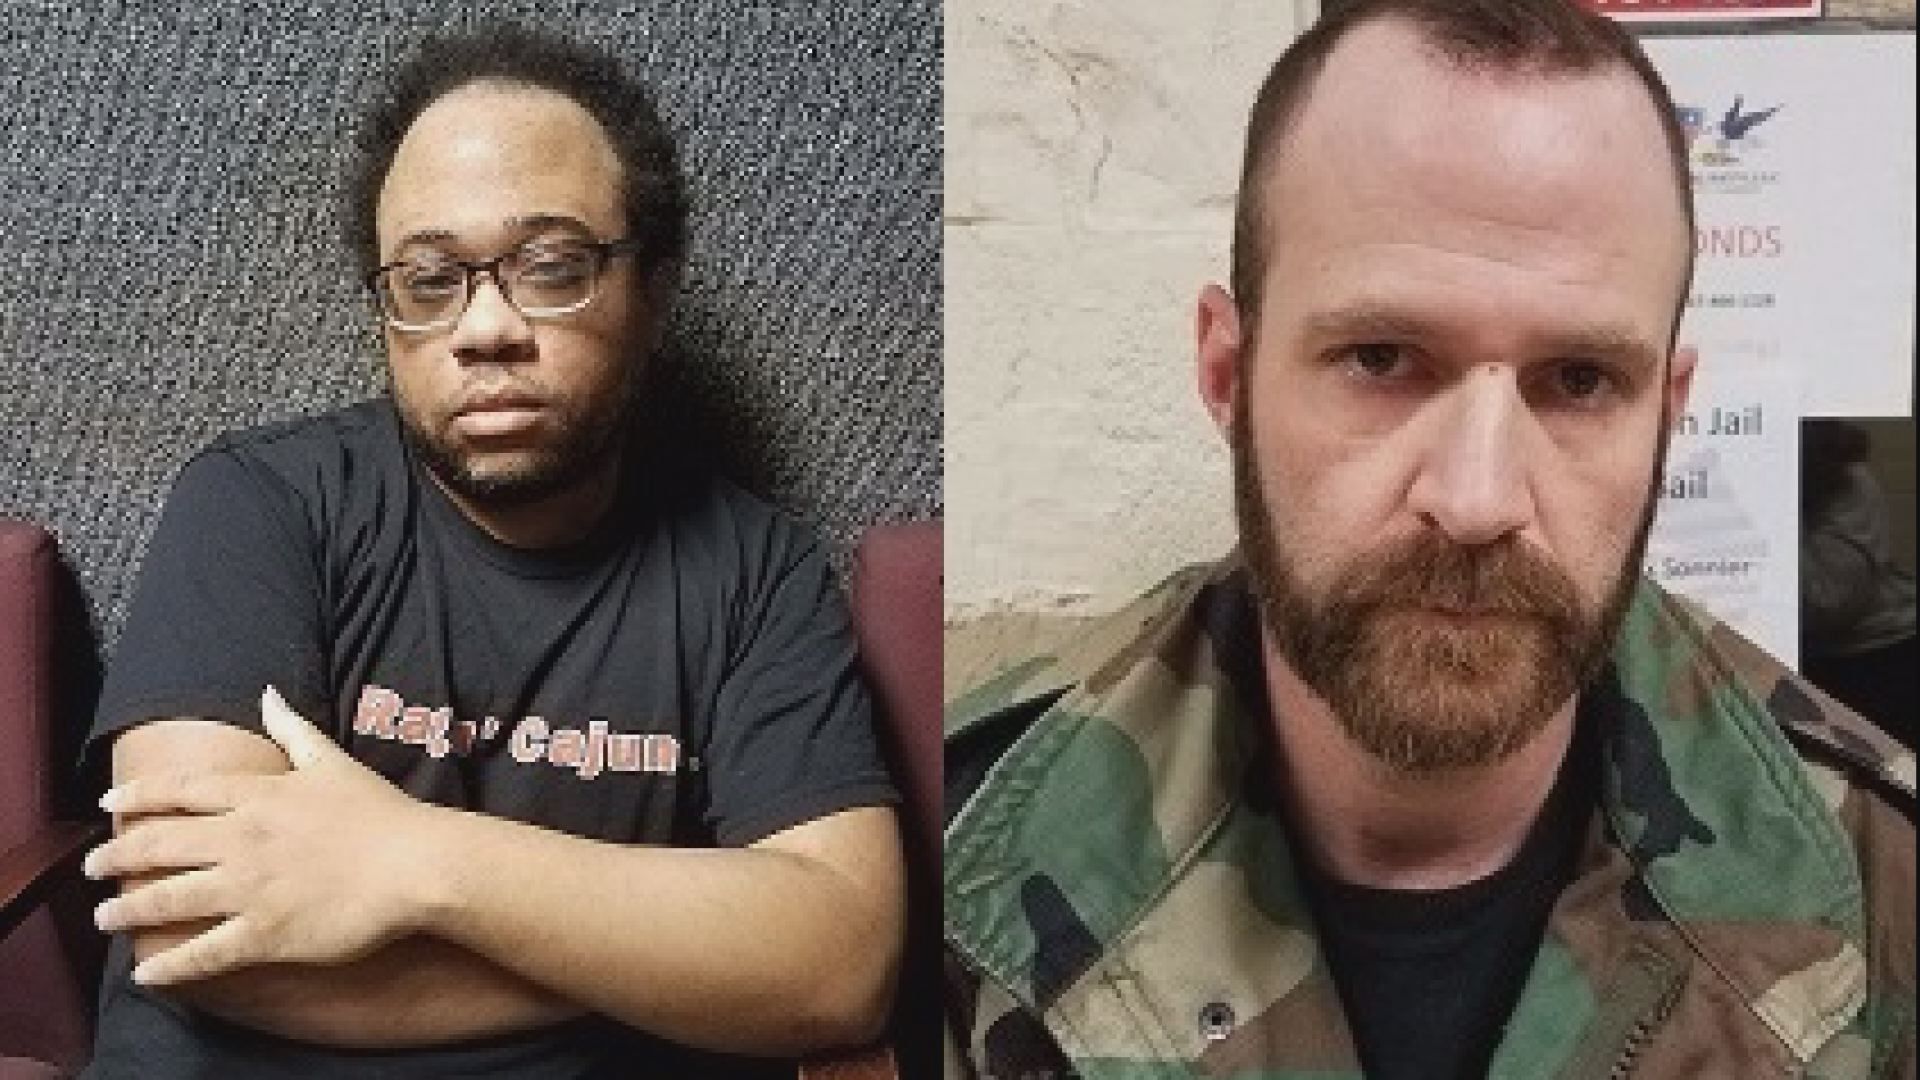 Chin 16yarsh Xxx Com - Bunkie man and Eunice man arrested for child porn charges